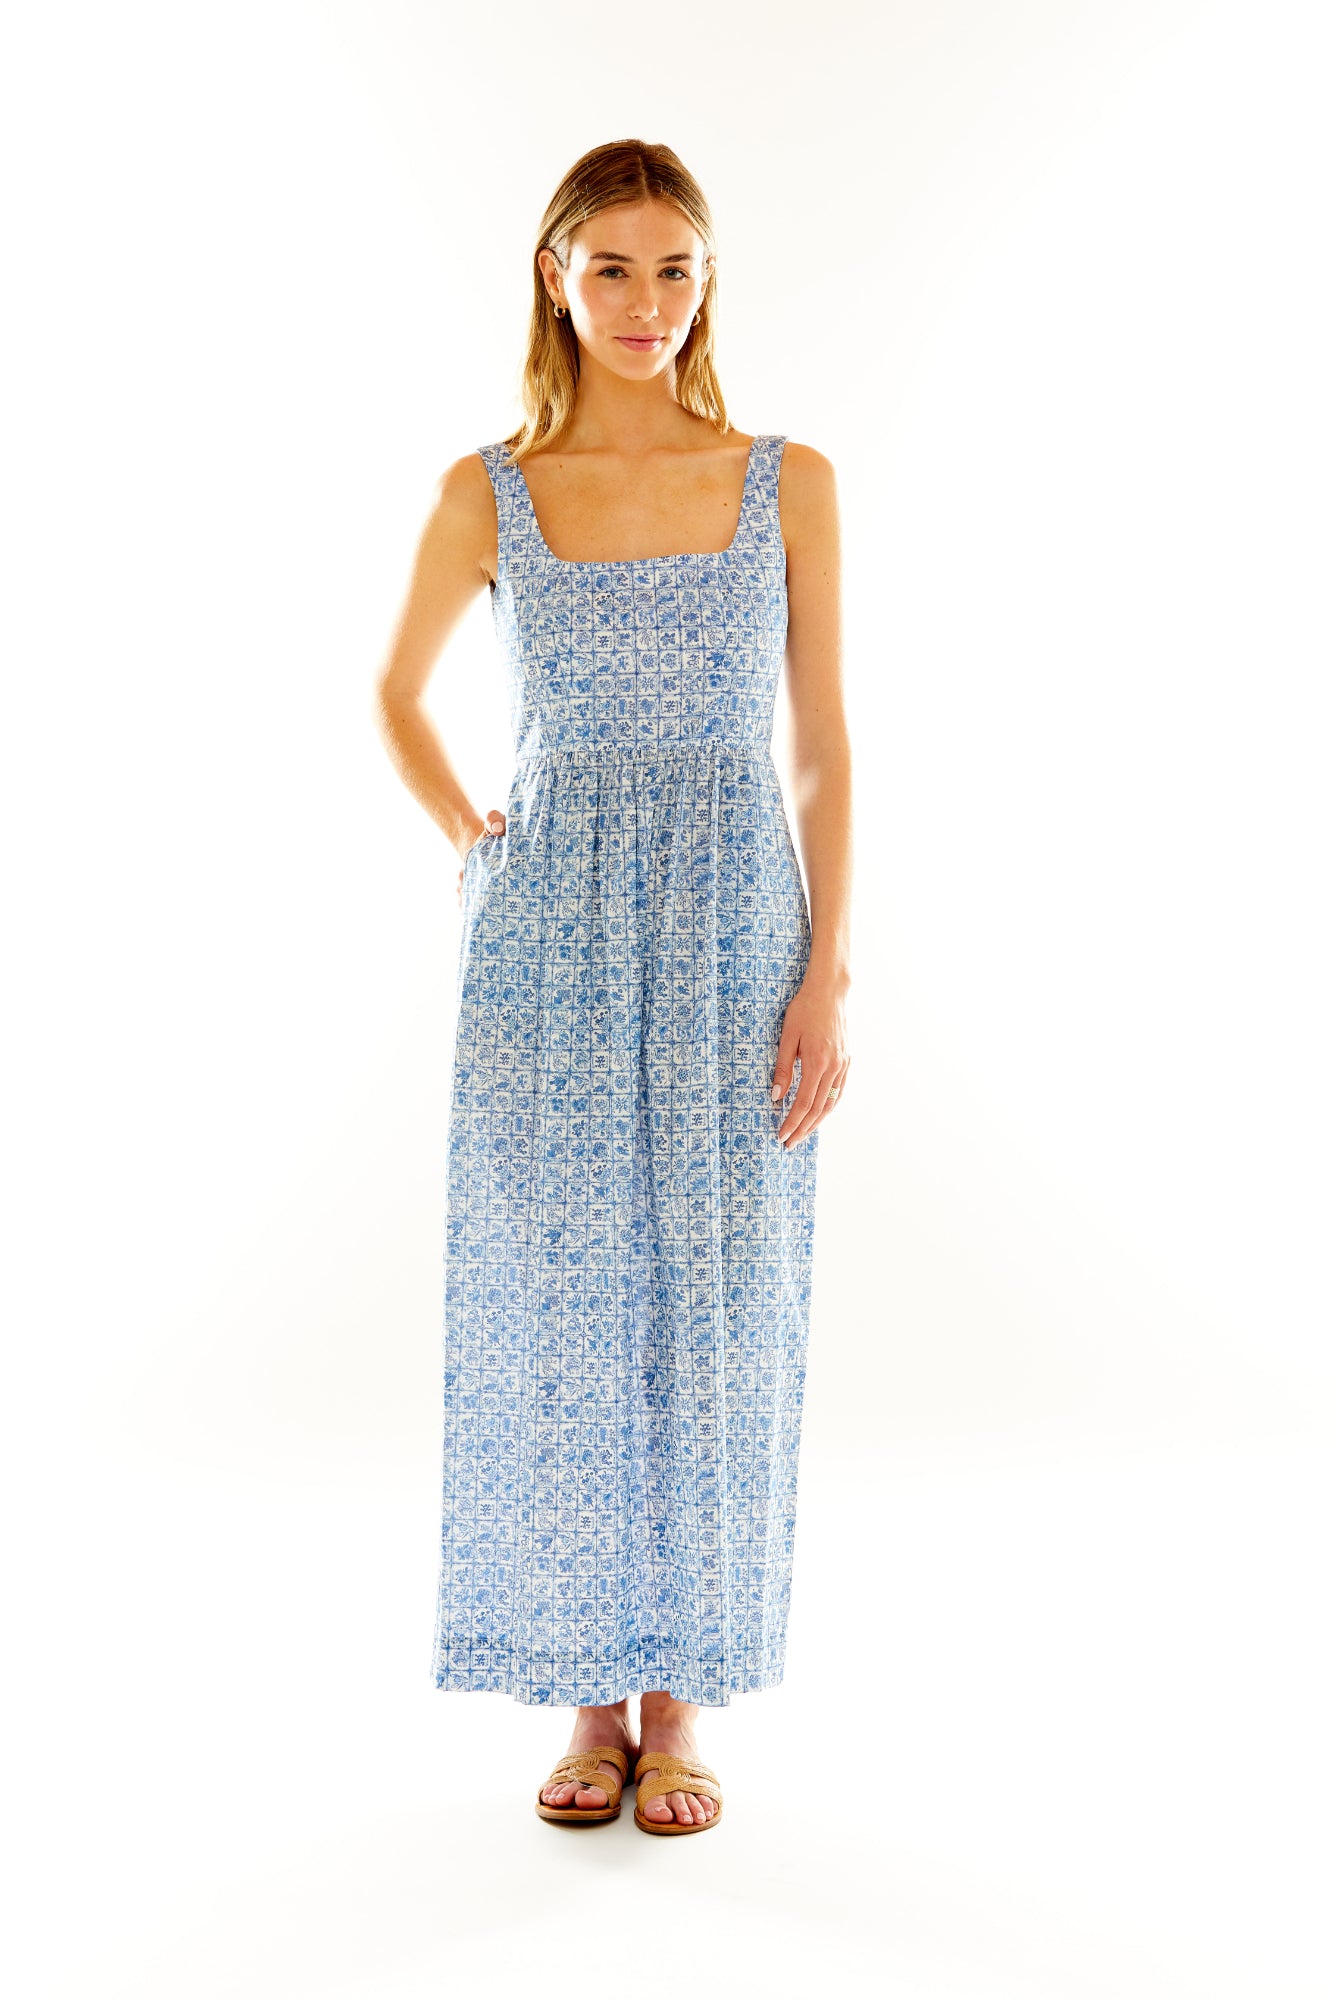 Woman in blue floral maxi dress